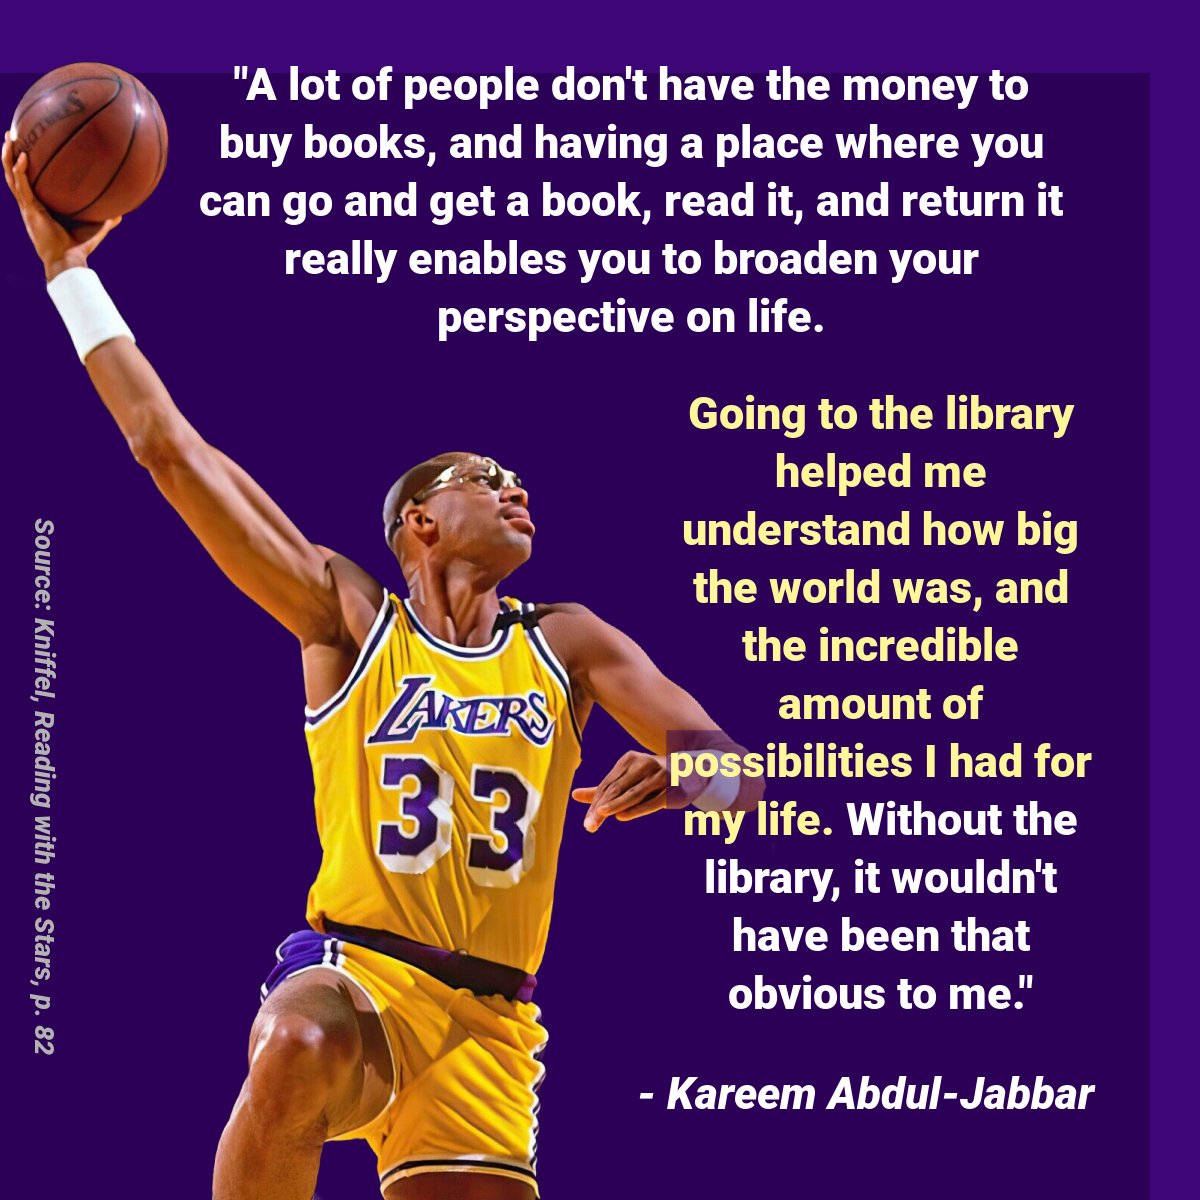 'I've been an avid reader my whole life & spent a lot of time in the library when I was a kid.' Wishing a speedy recovery to NBA champion #kareemabduljabbar, a lifelong supporter of #libraries & #literacy. All students deserve school libraries. 
#literacymatters #txed #HISD